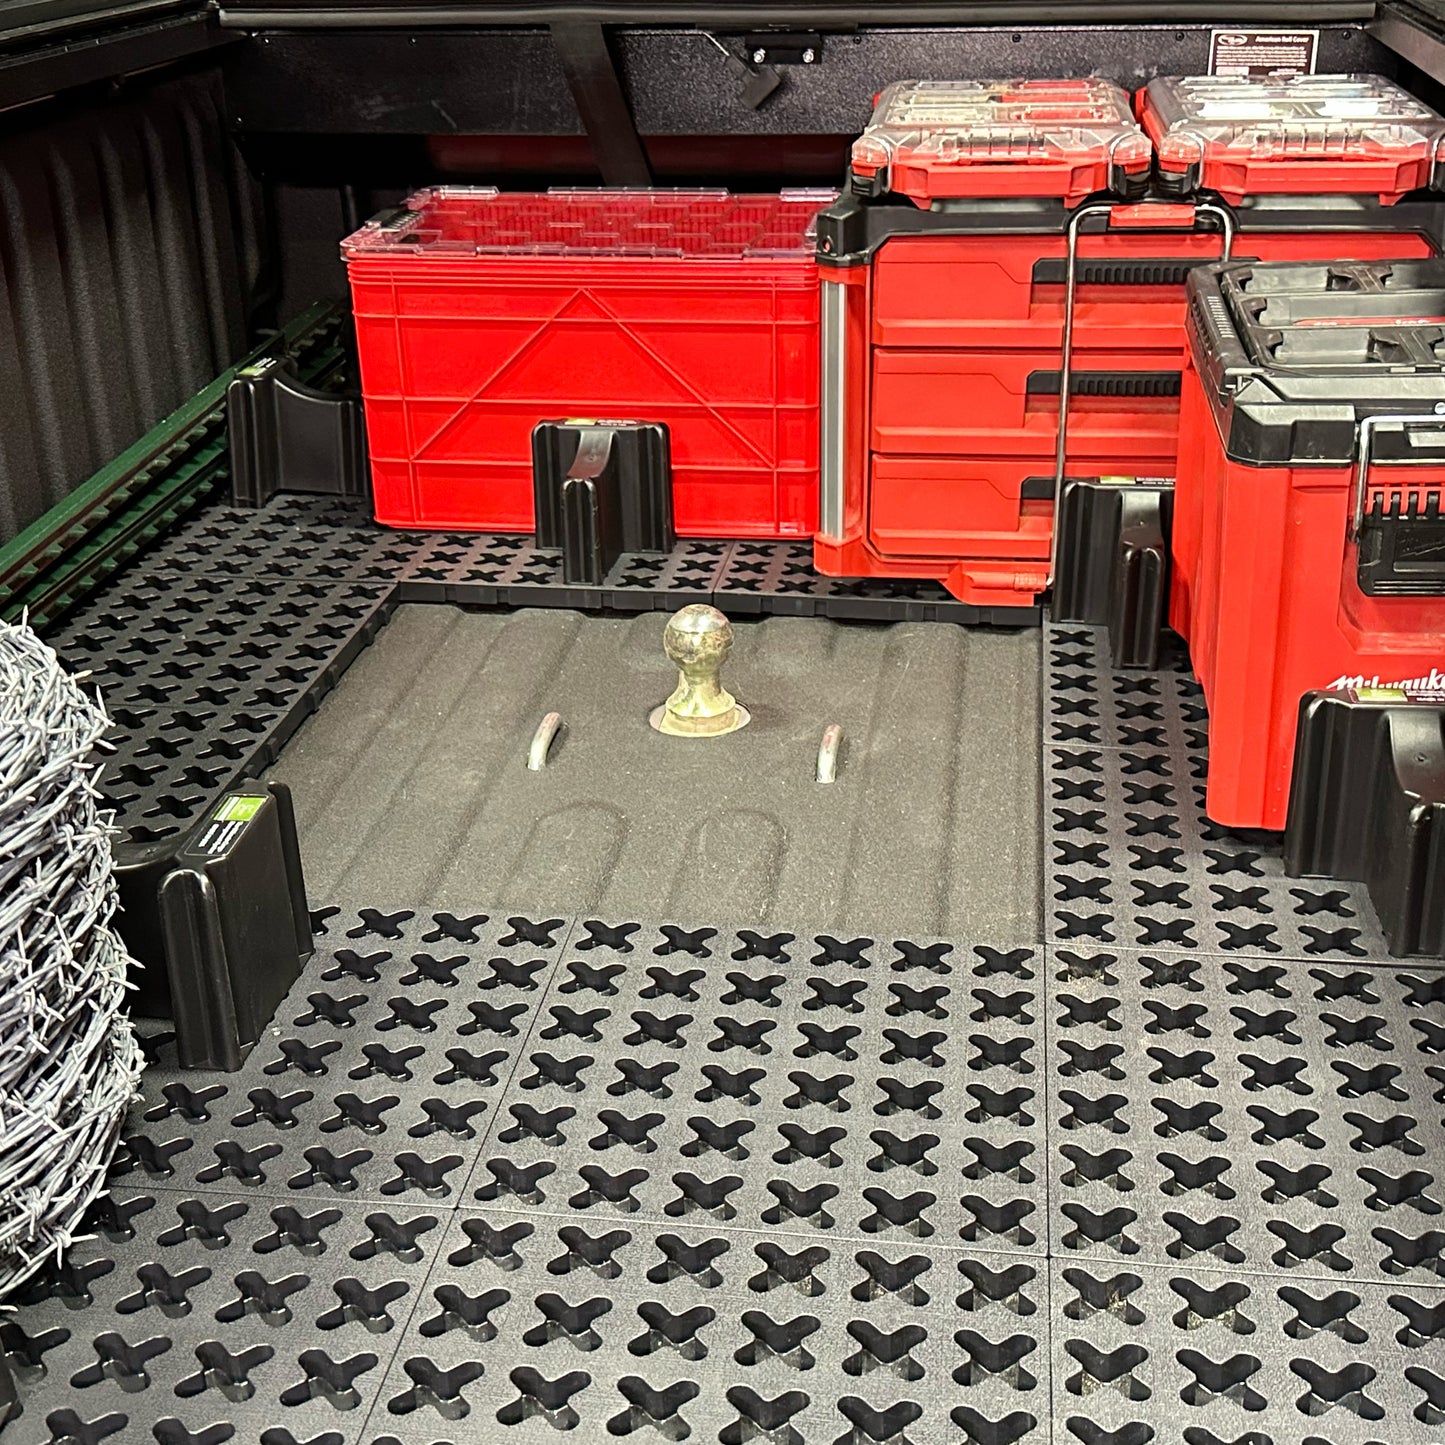 Packout tool boxes, a red milk crate, spool of barb wire, and t-posts secured in a truck bed around a gooseneck hitch.